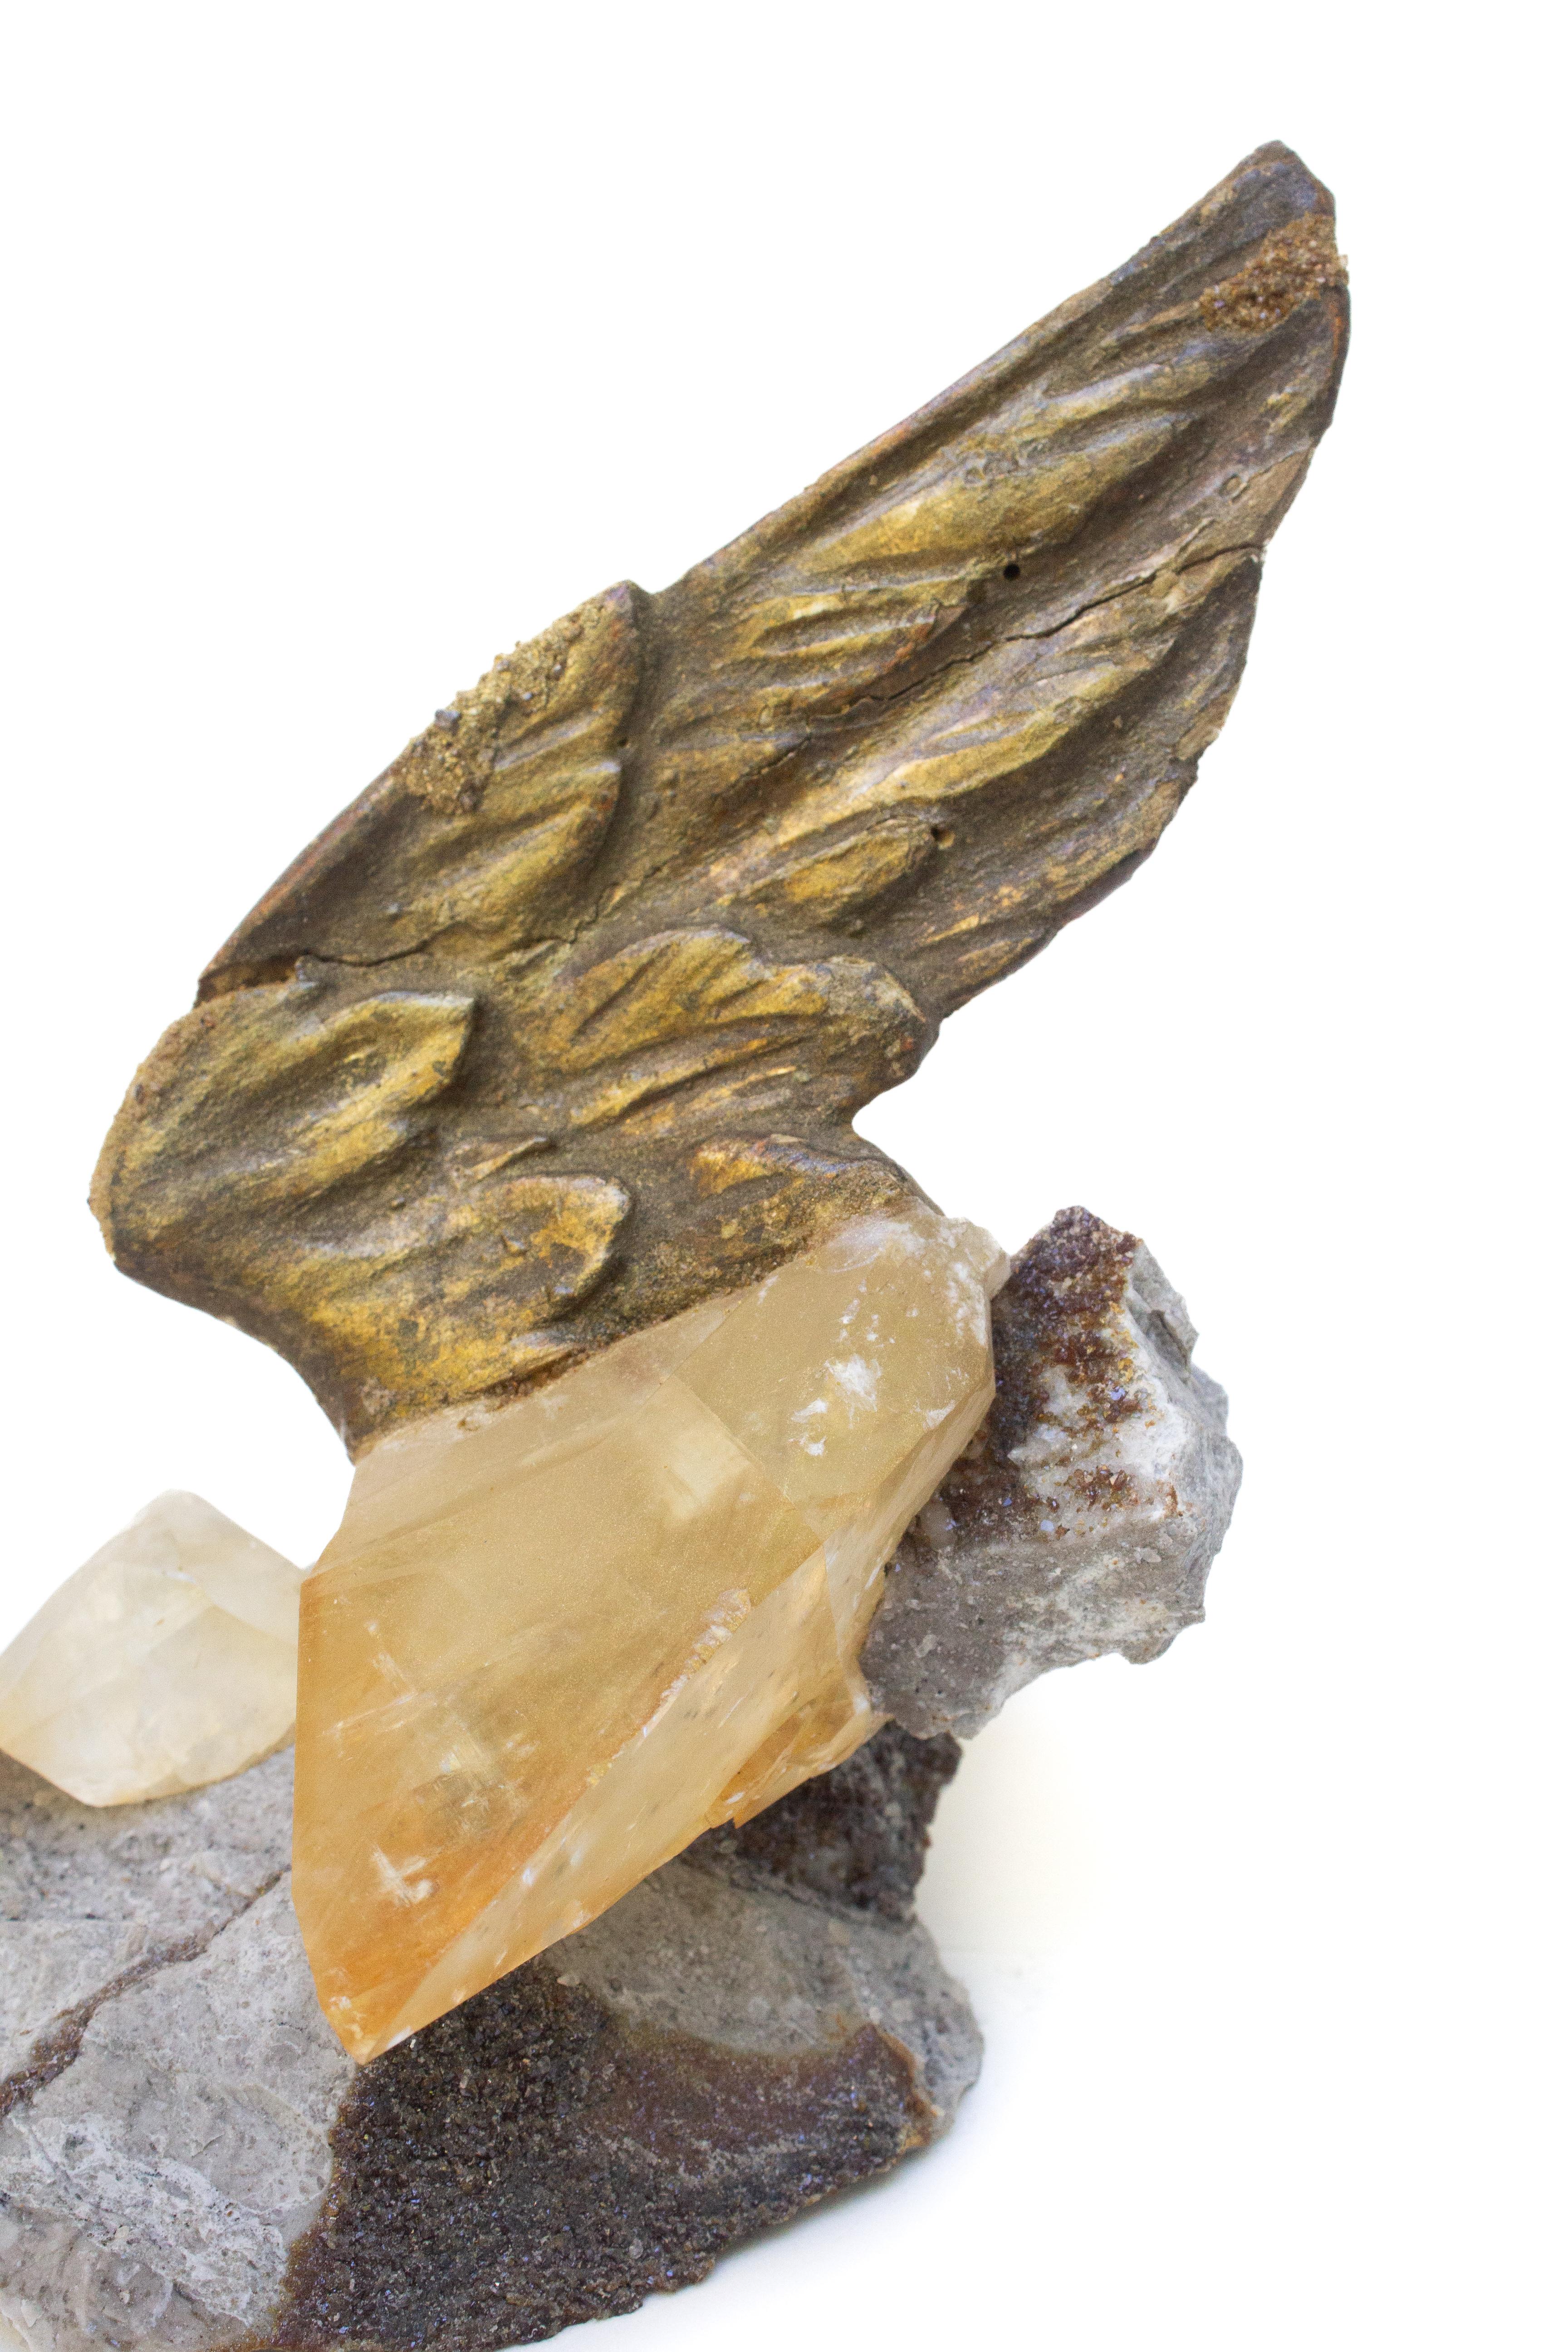 Hand-Carved 18th Century Gilded Italian Angel Wing on Calcite Crystal in Sphalerite